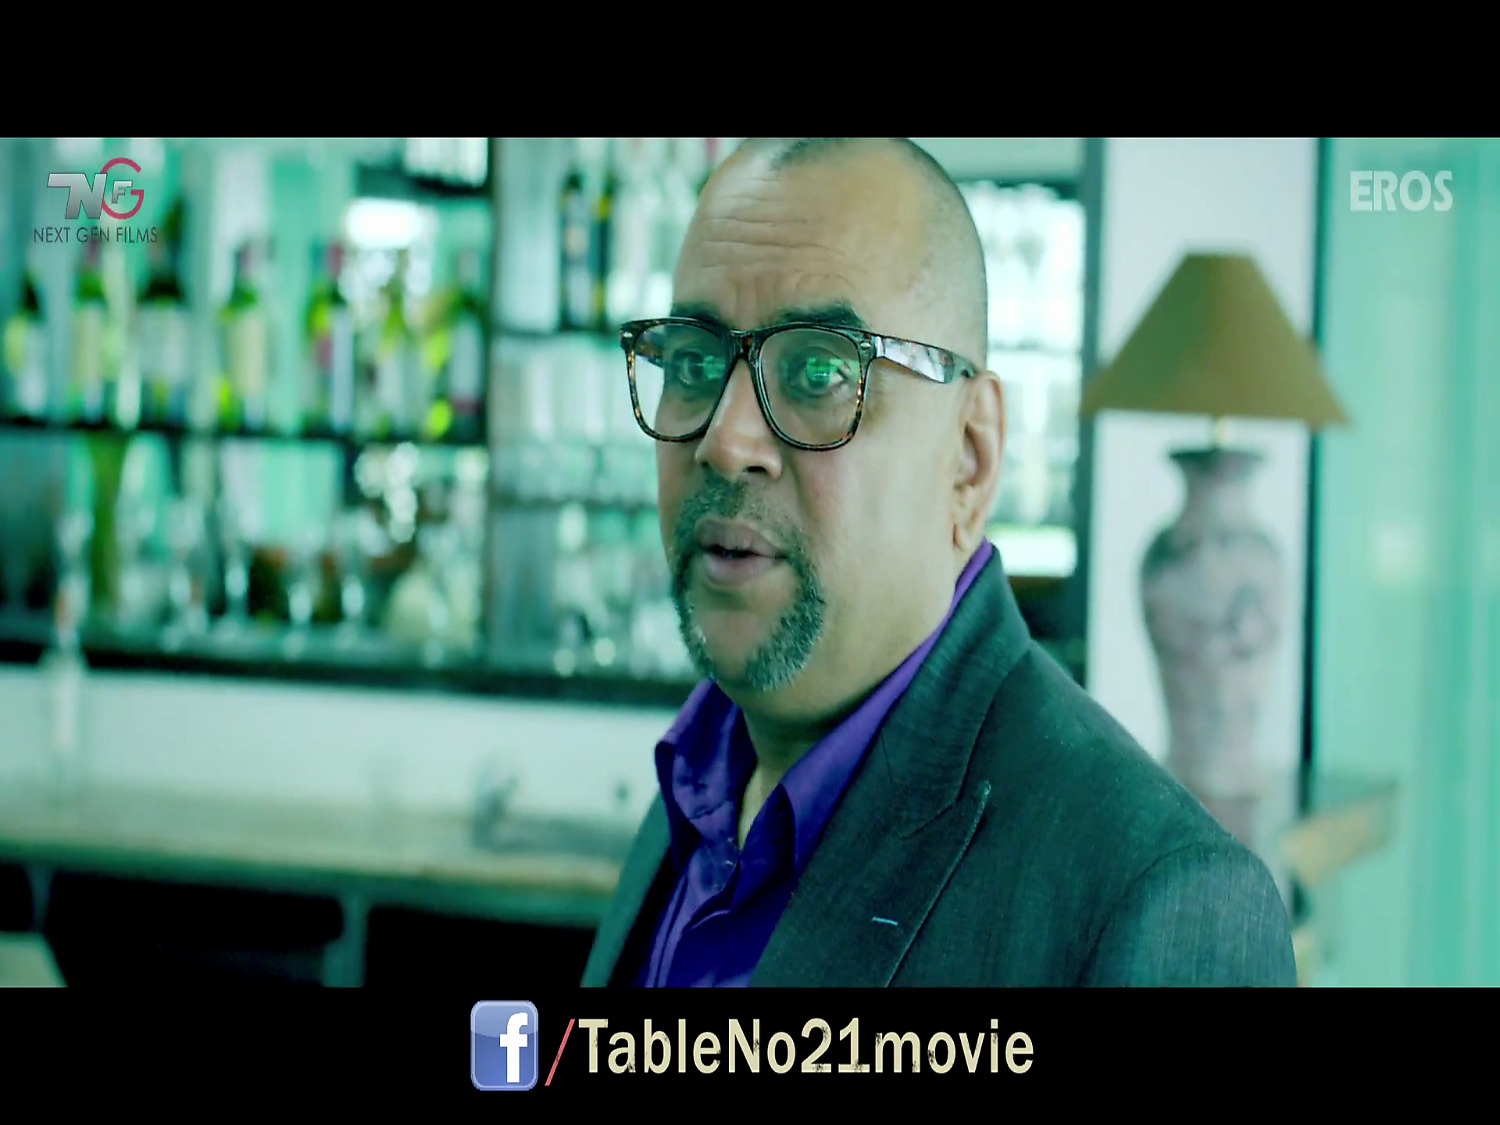 table no 21 movie free download for mobile